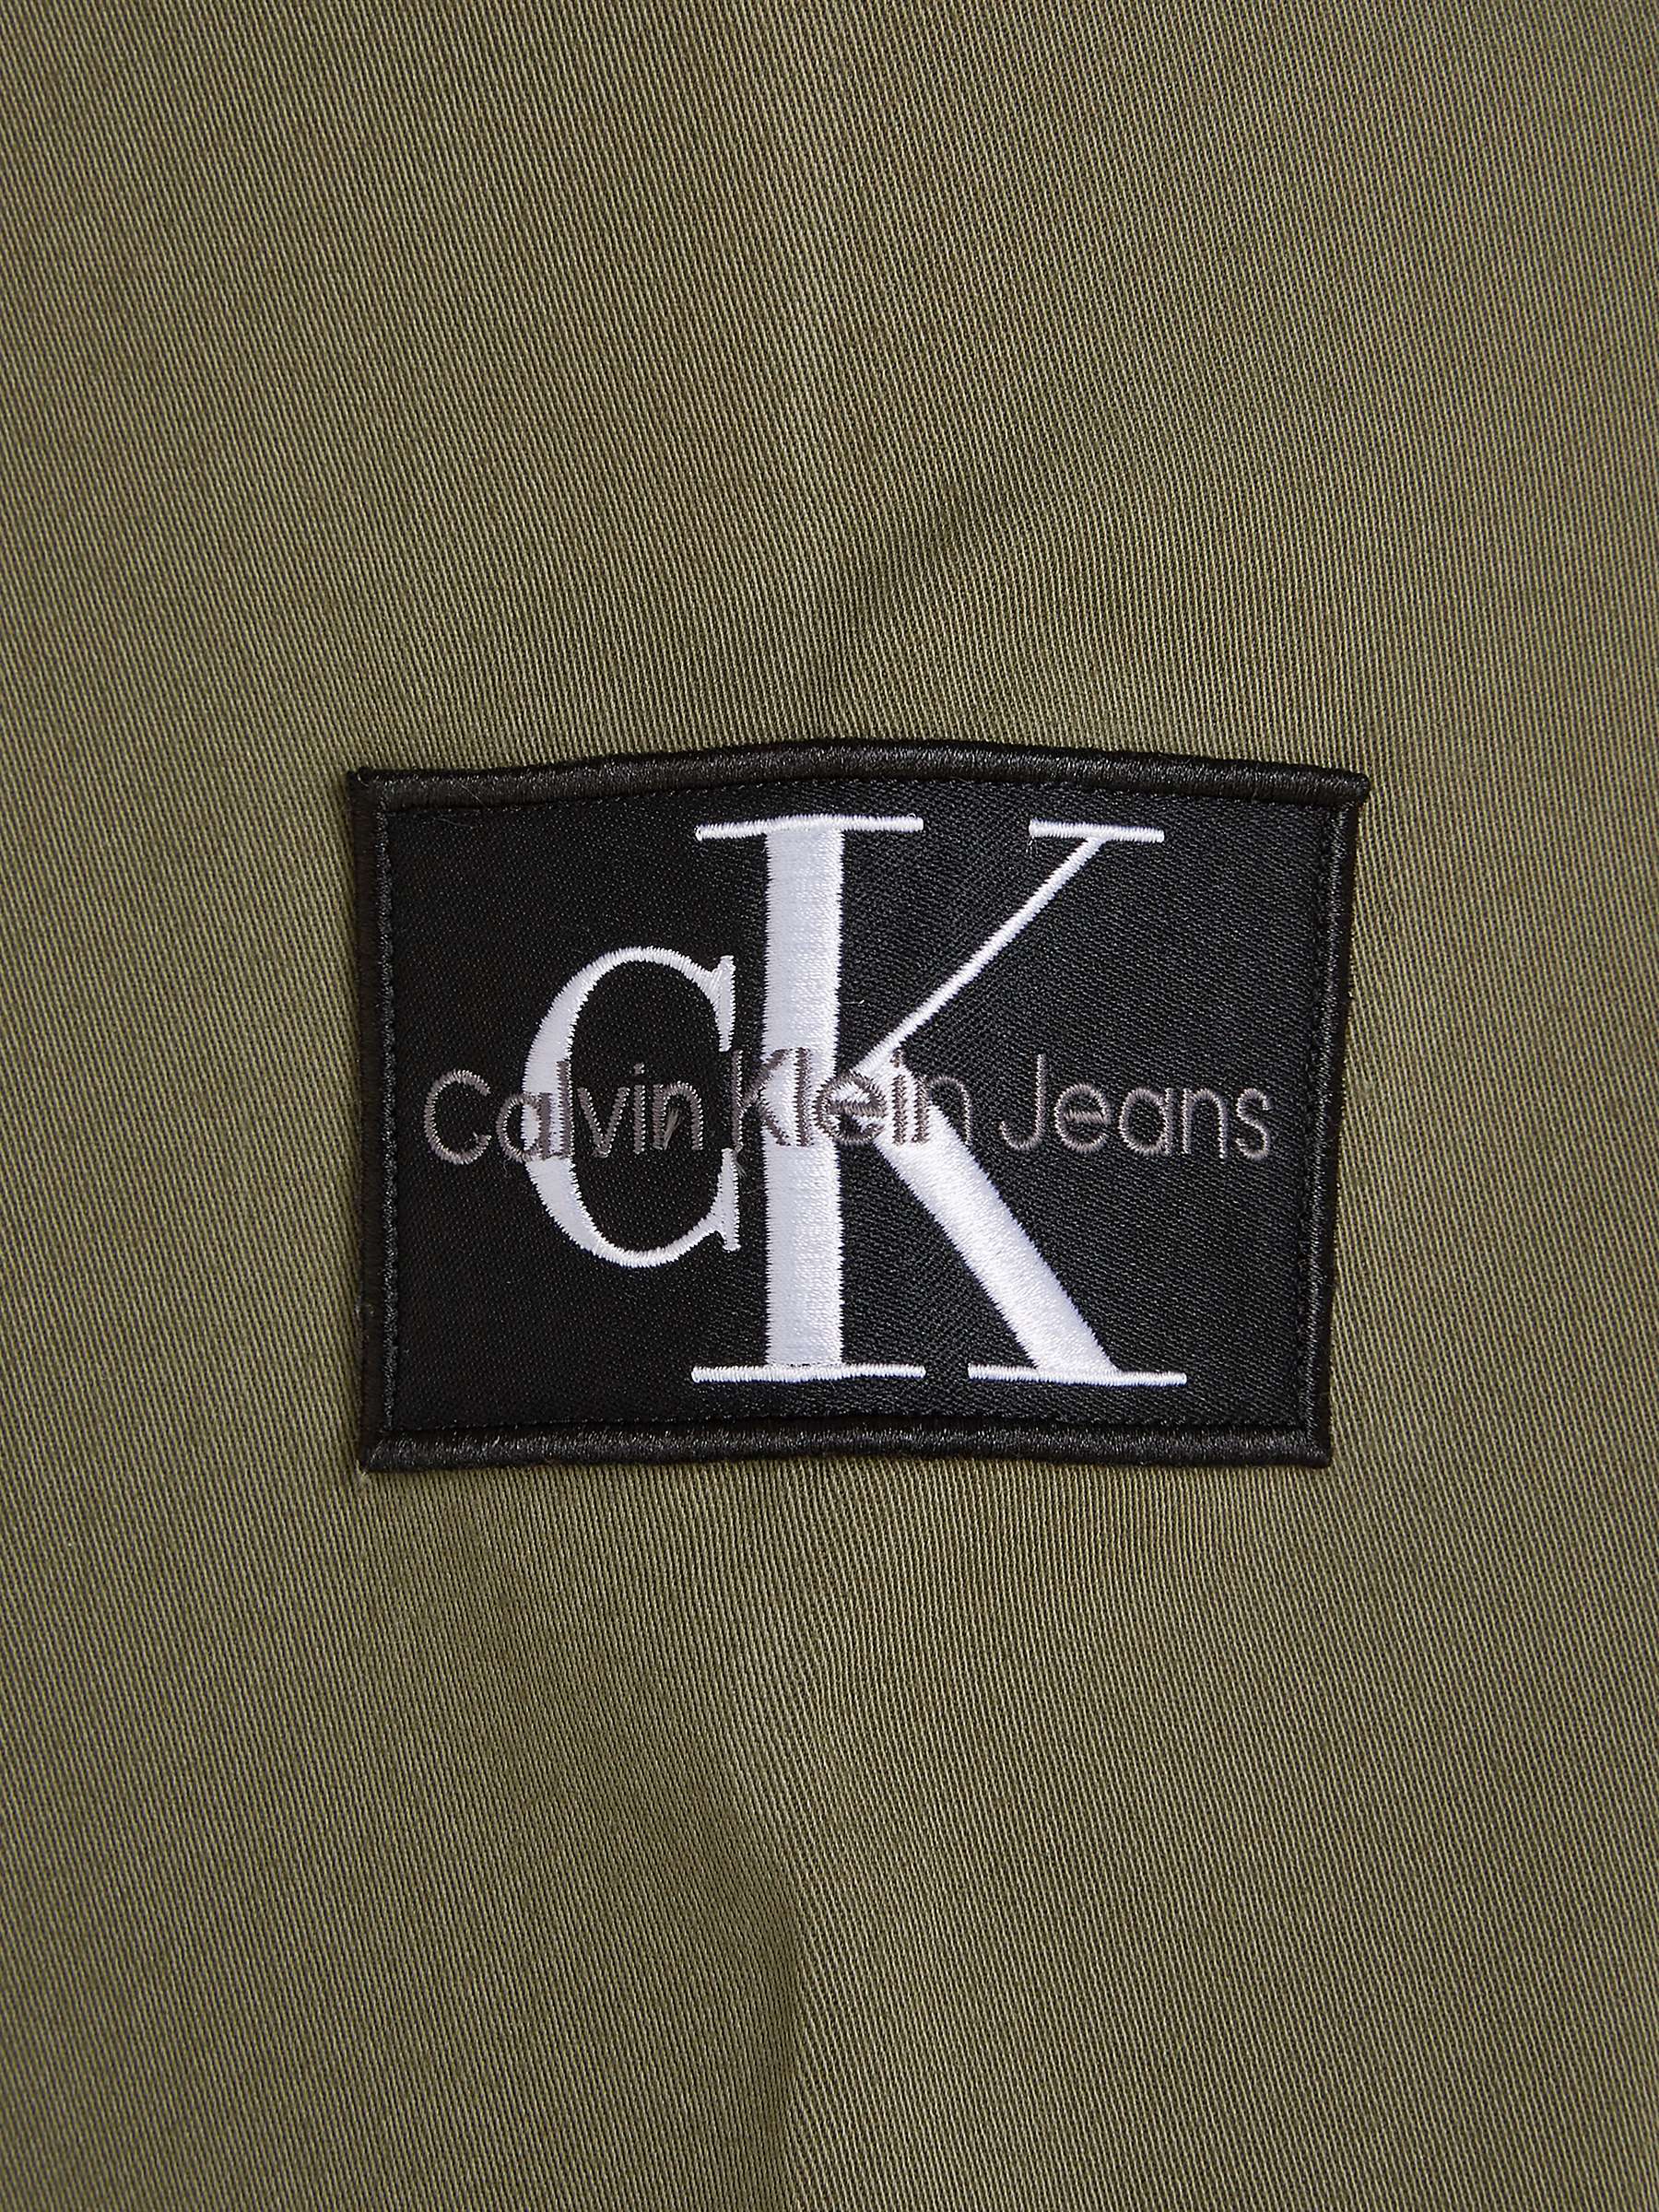 Buy Calvin Klein Jeans Relaxed Monologo Shirt, Dusty Olive Online at johnlewis.com